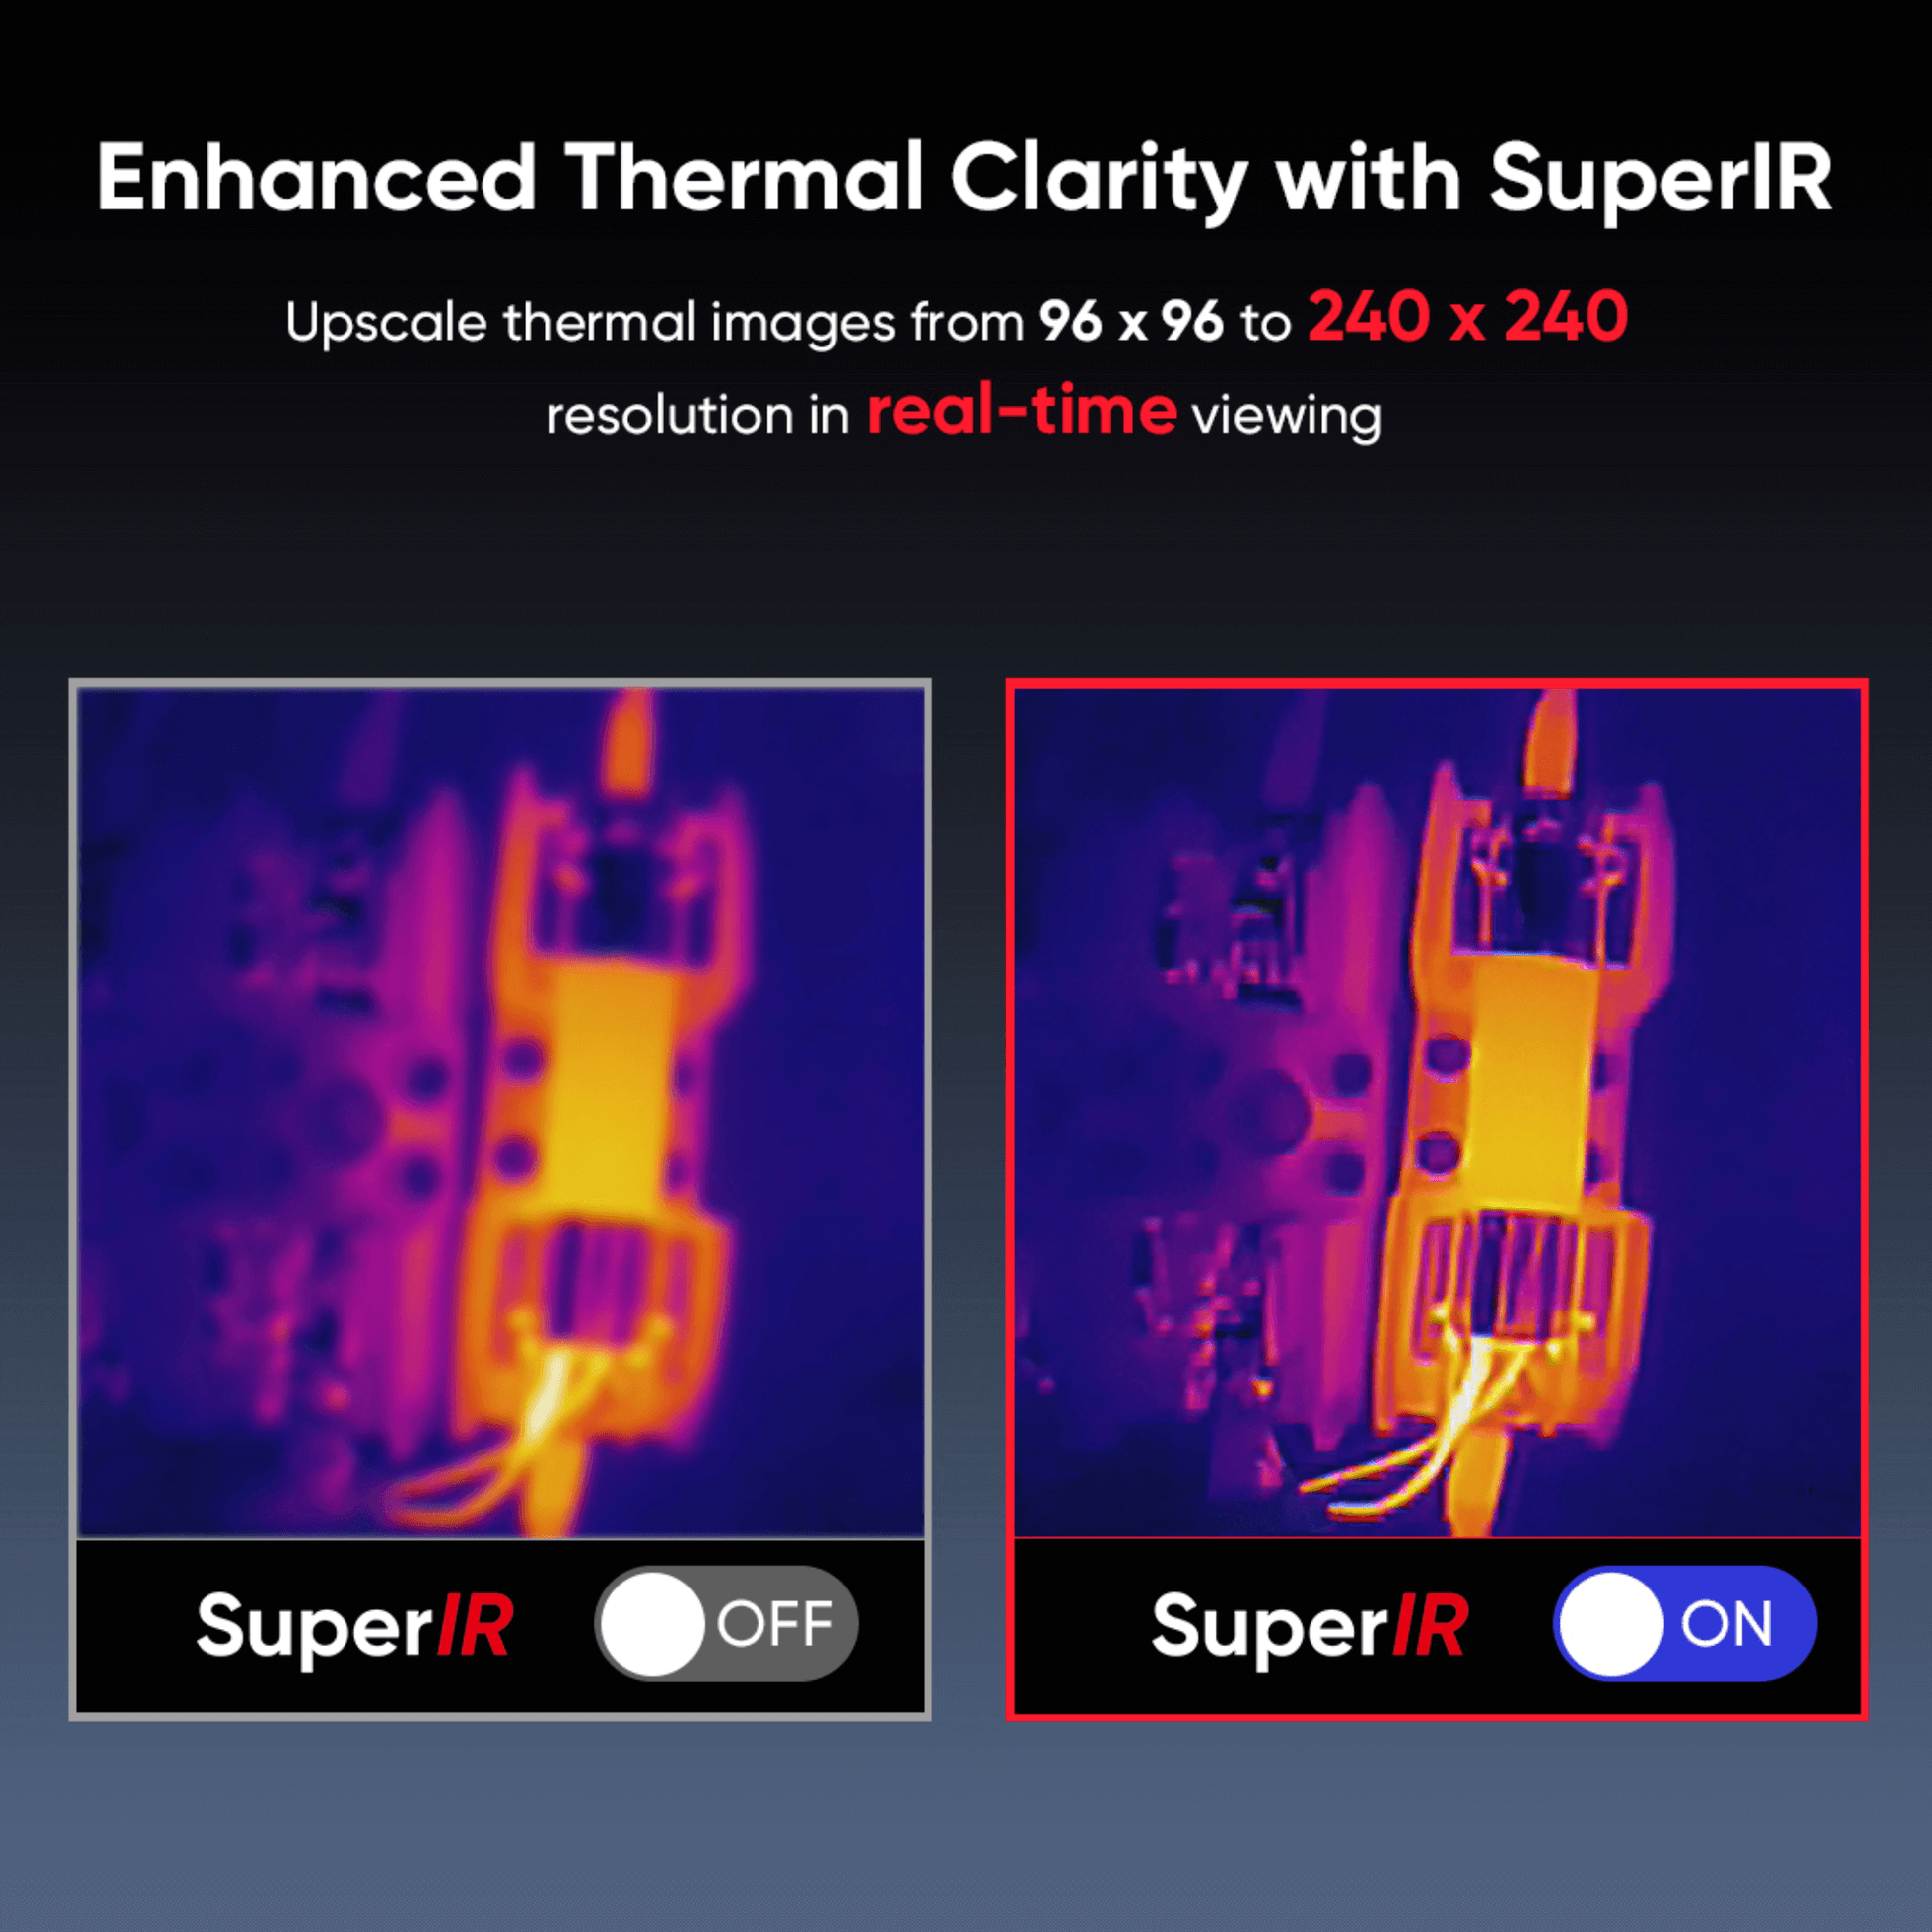 HikMicro Eco Handheld Thermal Imager Digitally upscale thermal images with SuperIR